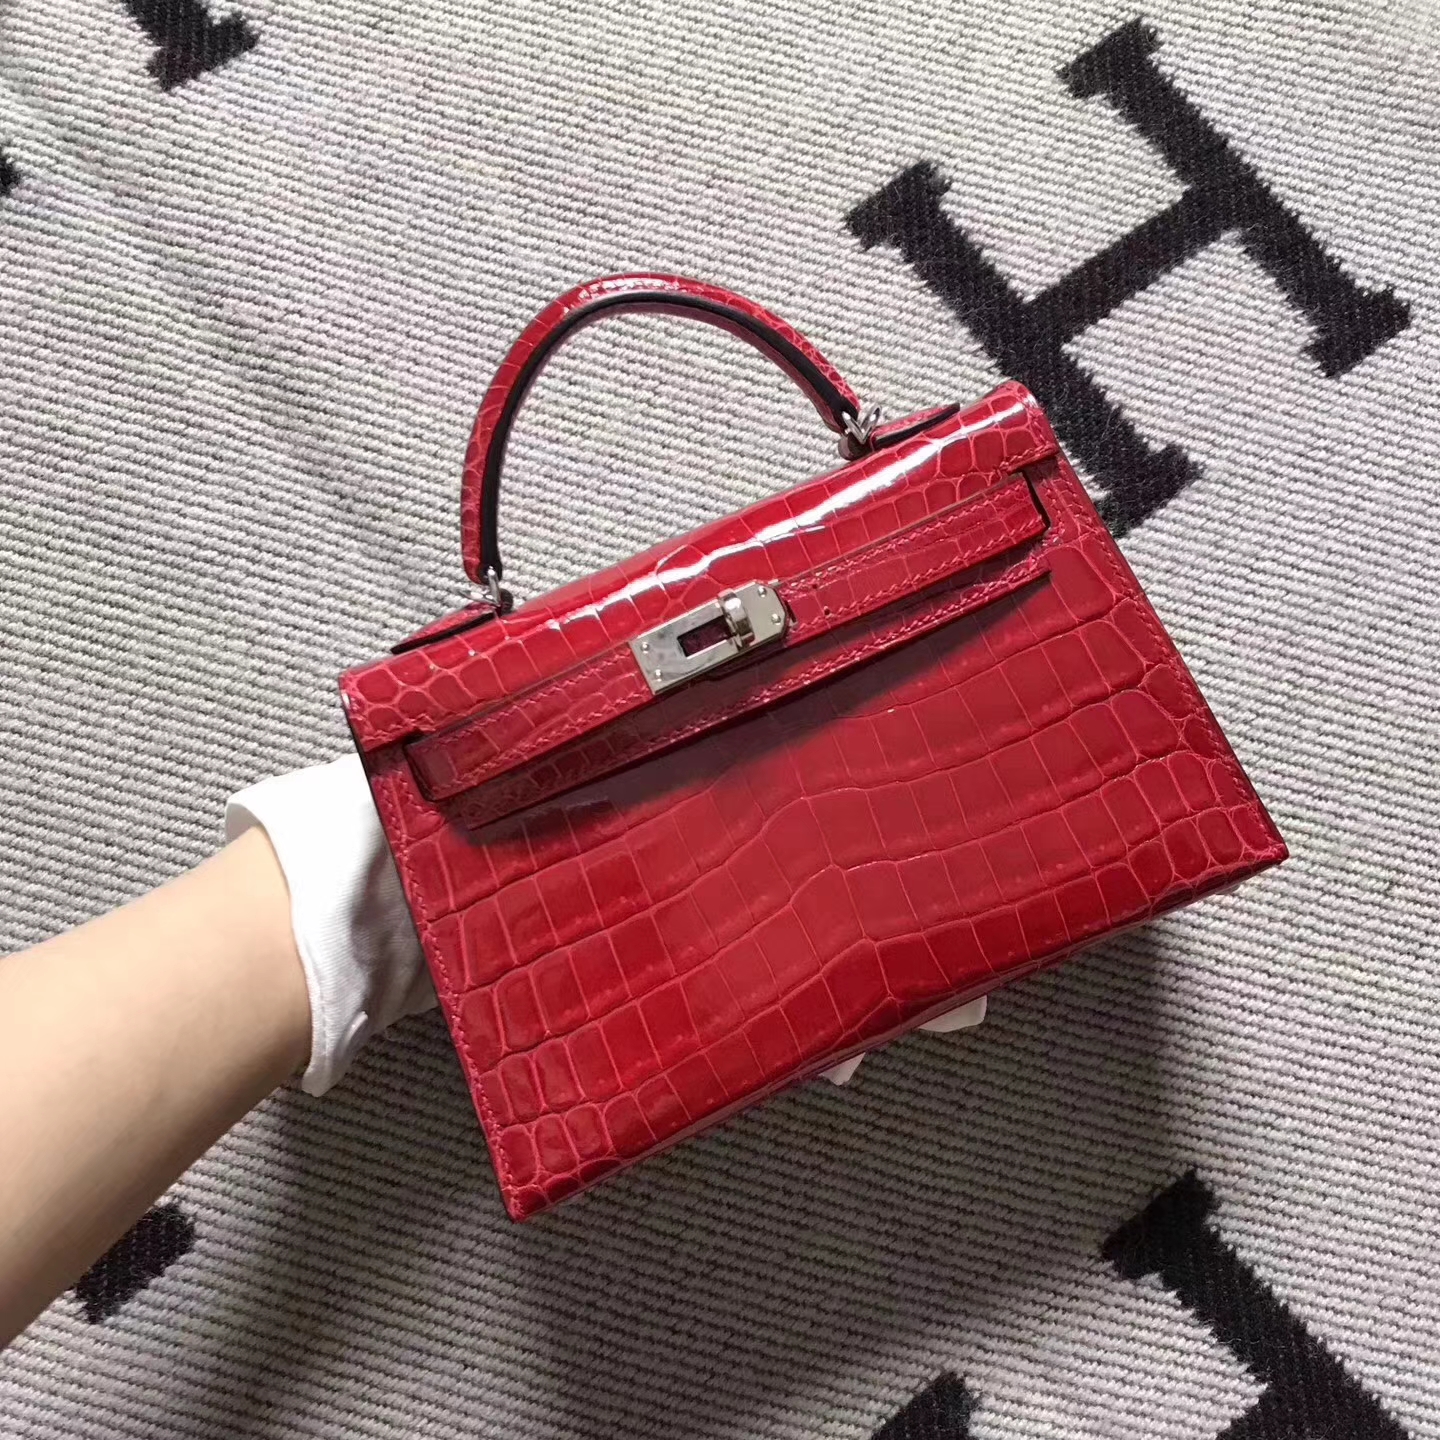 Discount Hermes Red Crocodile Shiny Leather Minikelly-2 Evening Bag Clutch Bag